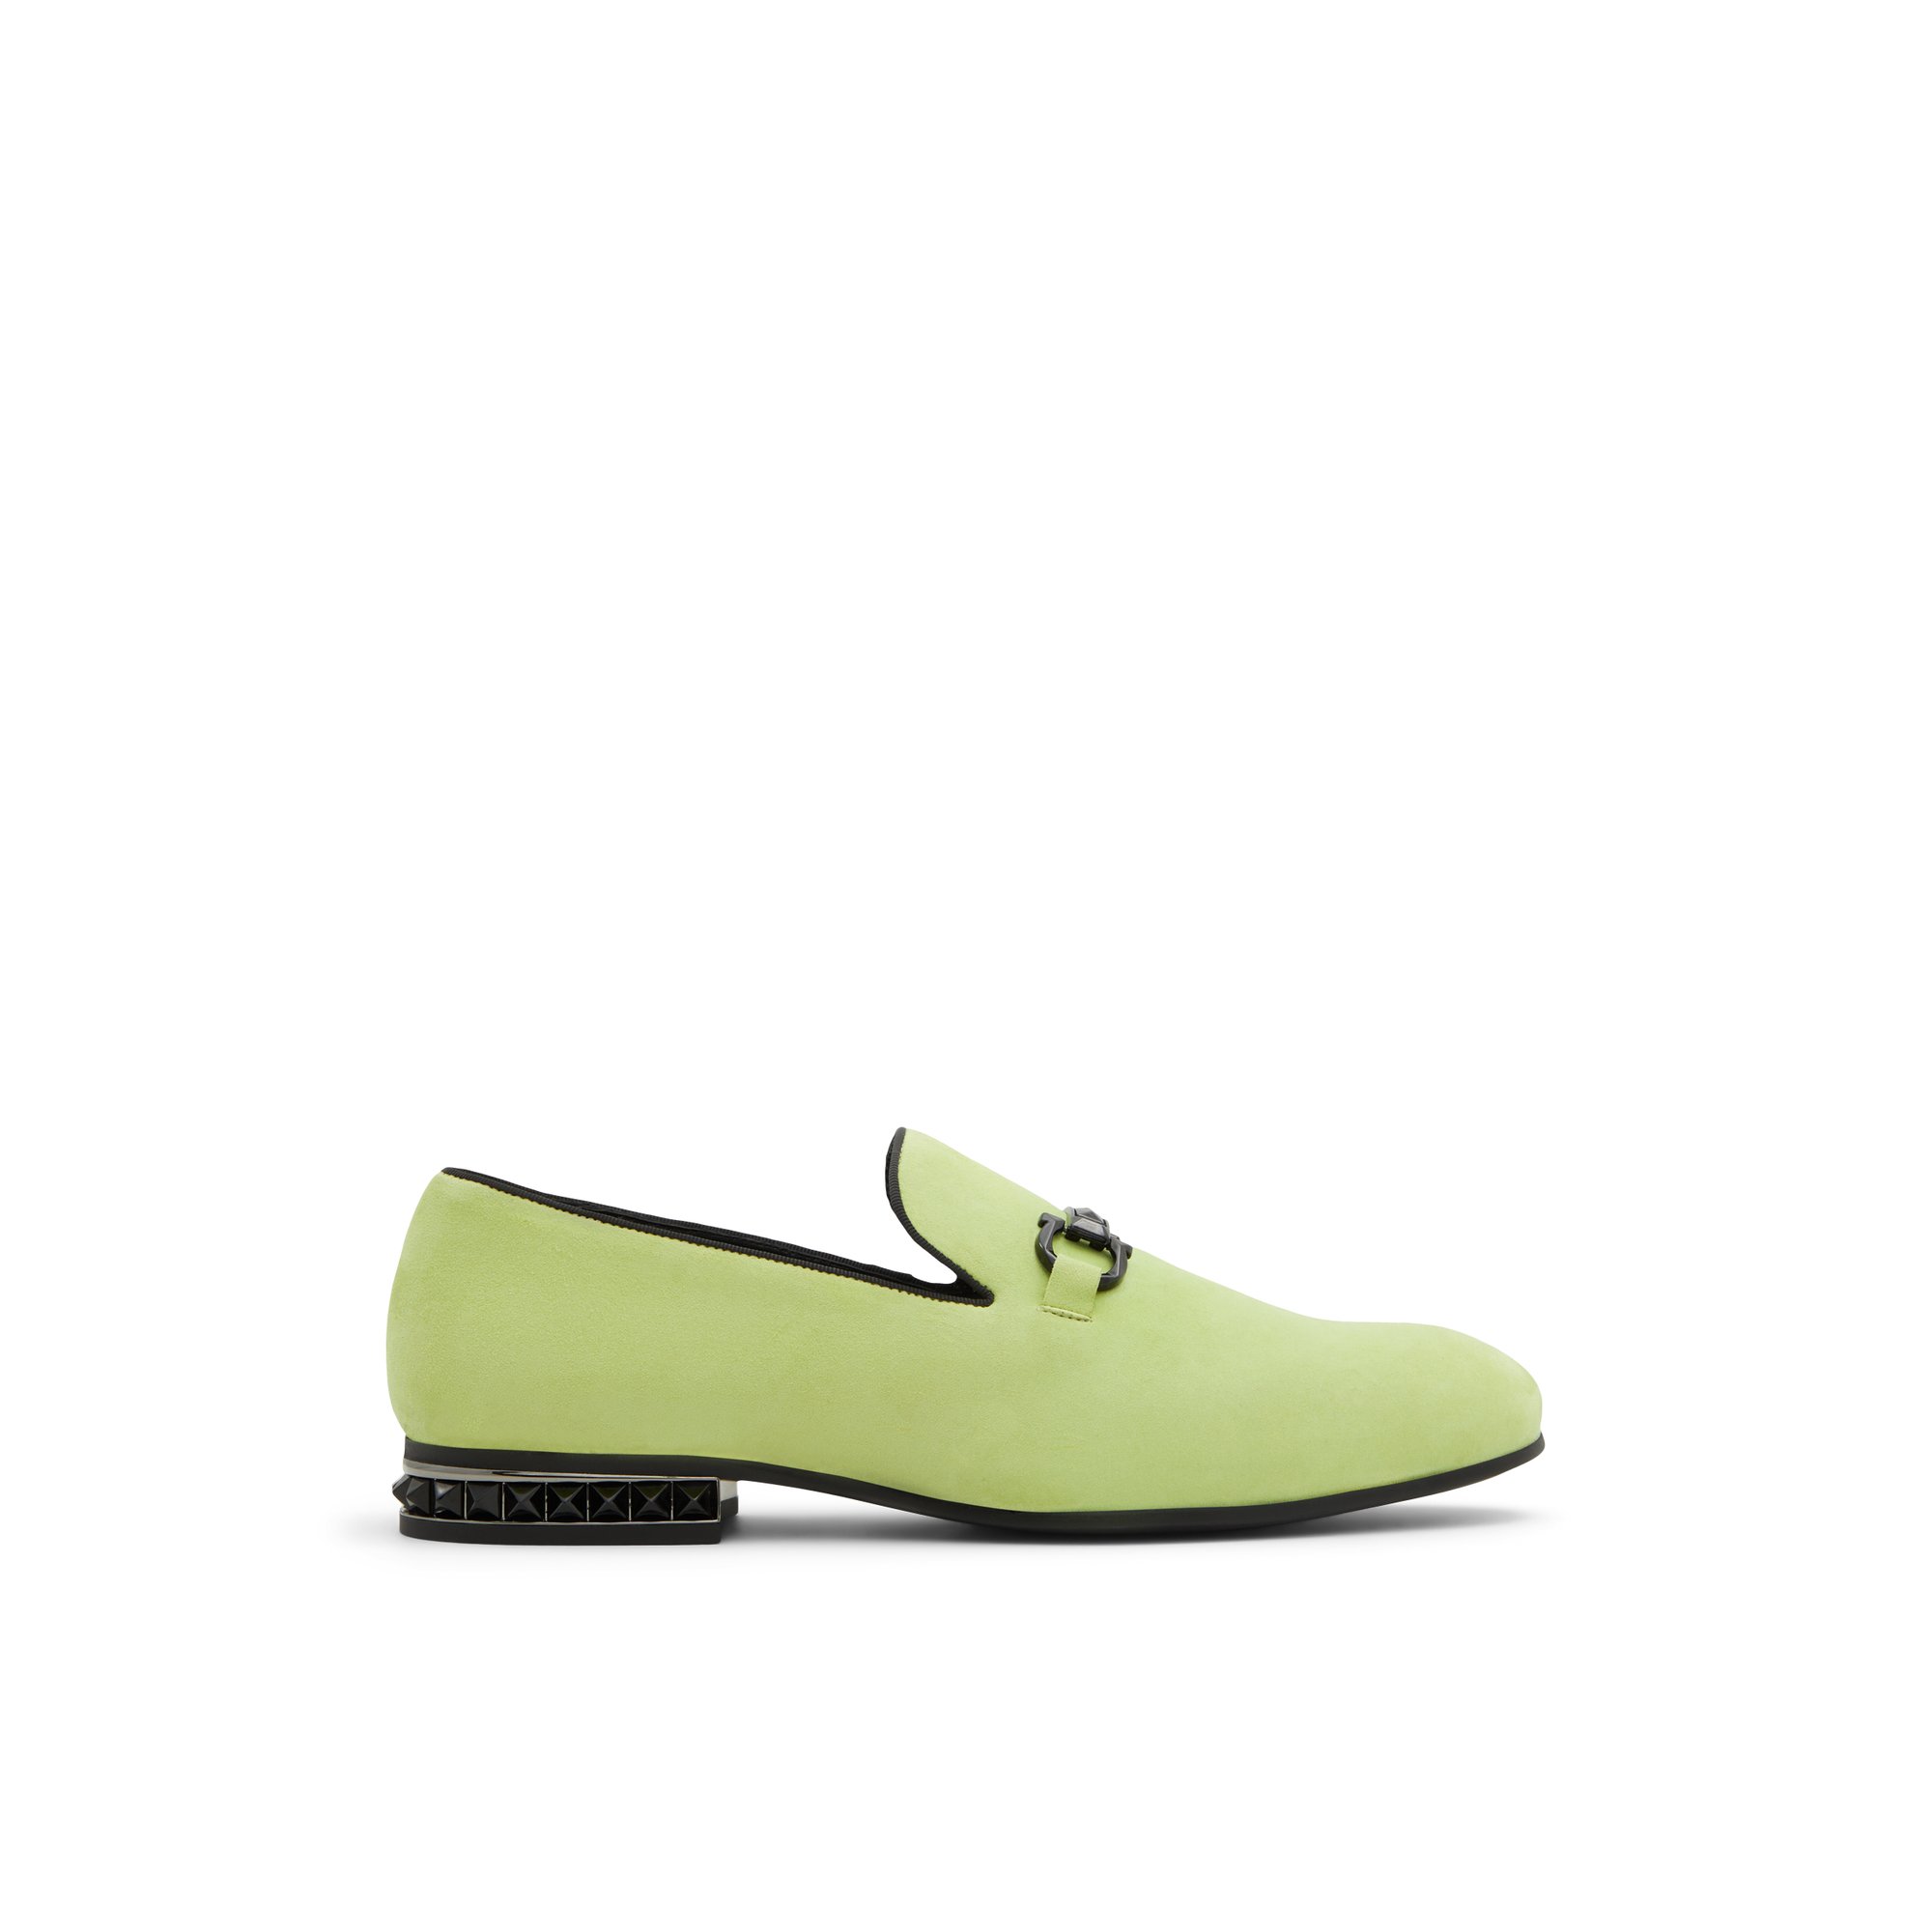 ALDO Bowtie - Men's Loafers and Slip Ons - Green